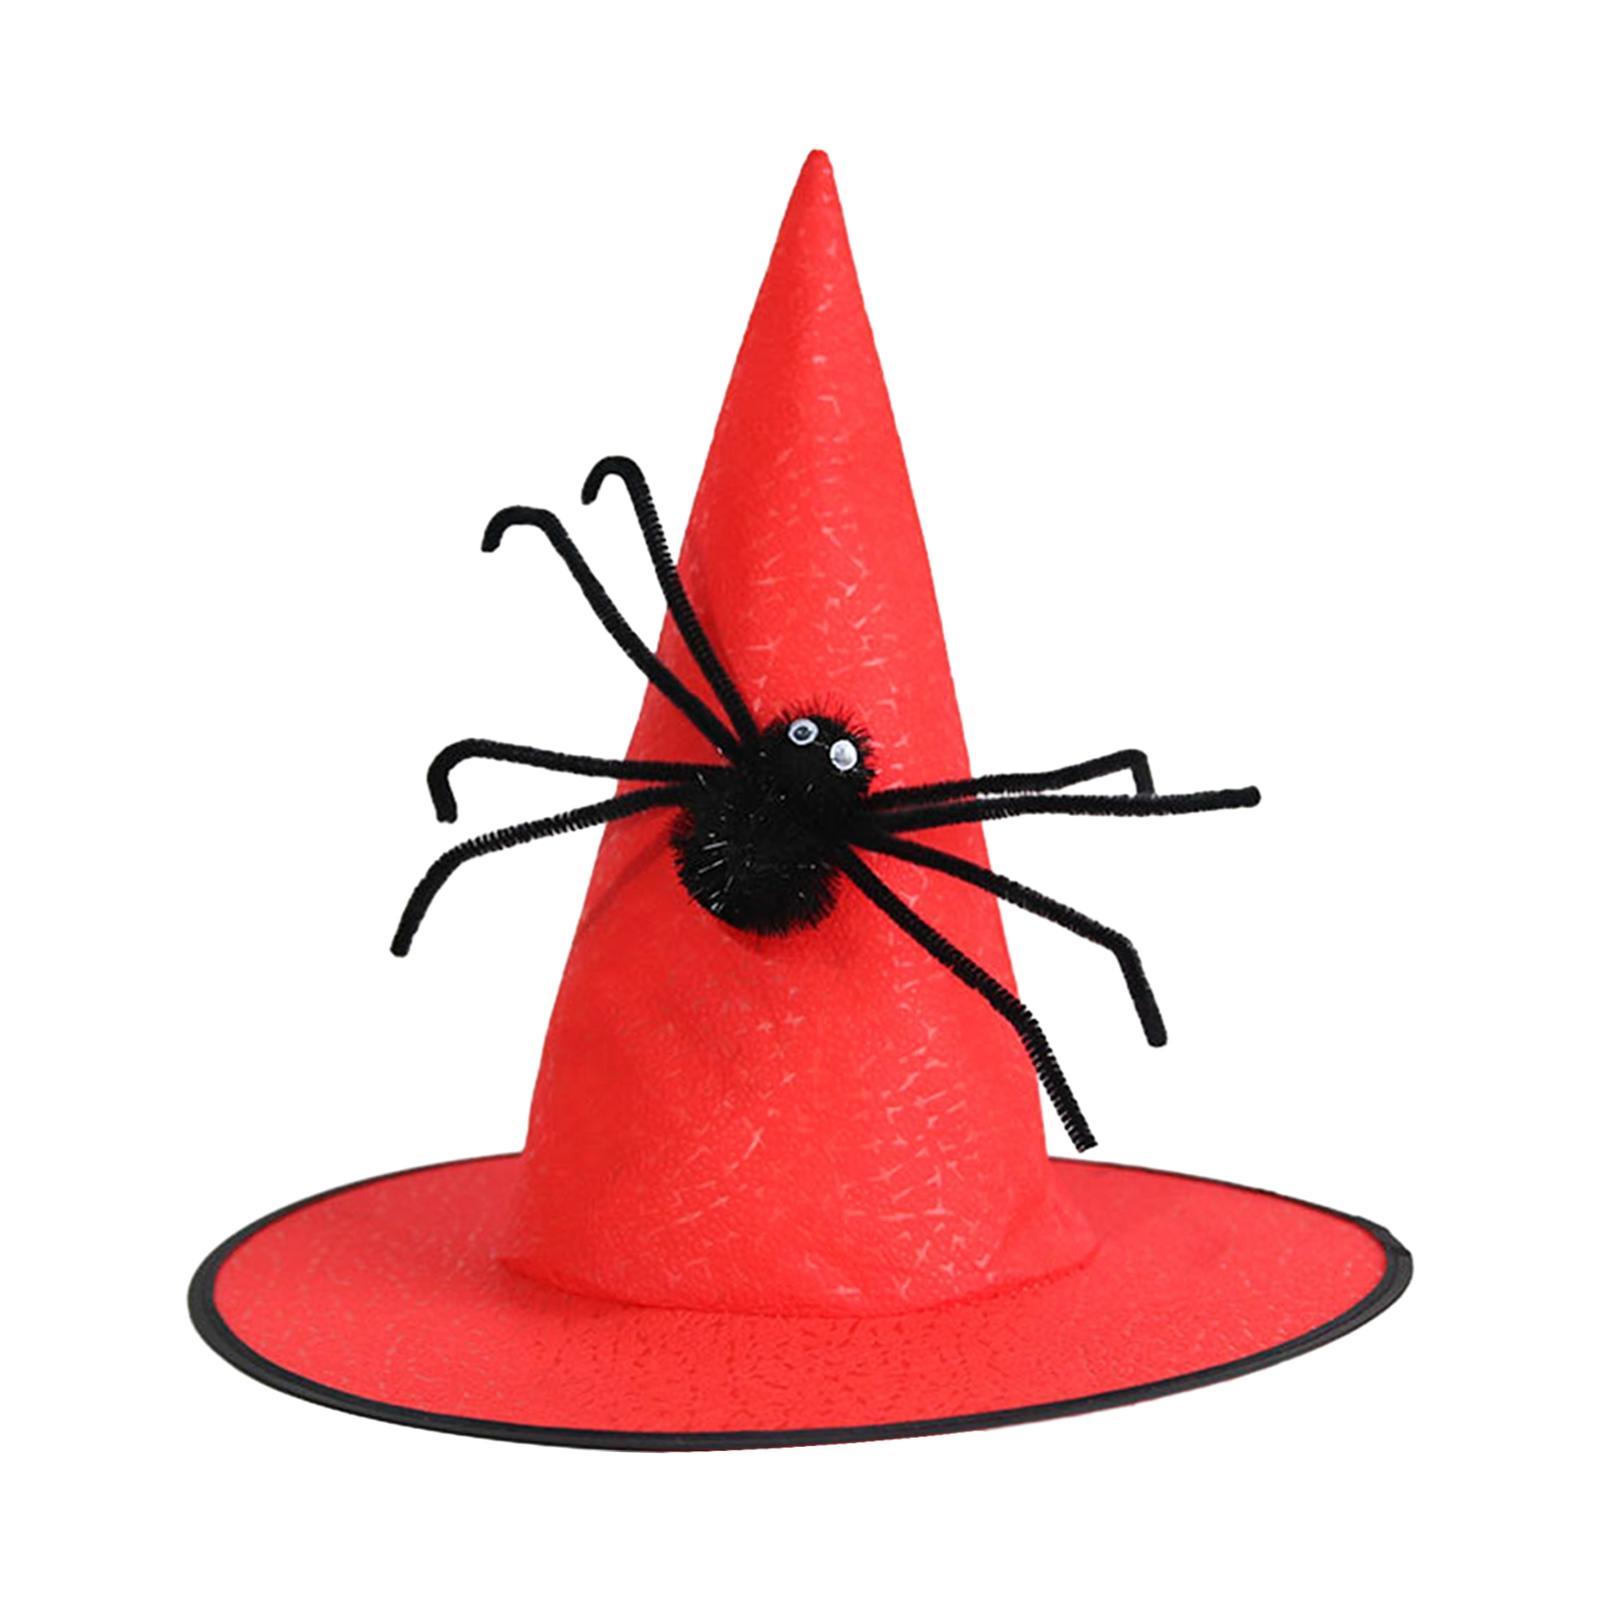 Witch Hat Cap Halloween Costume Accessory for Cosplay Masquerade Fancy Dress